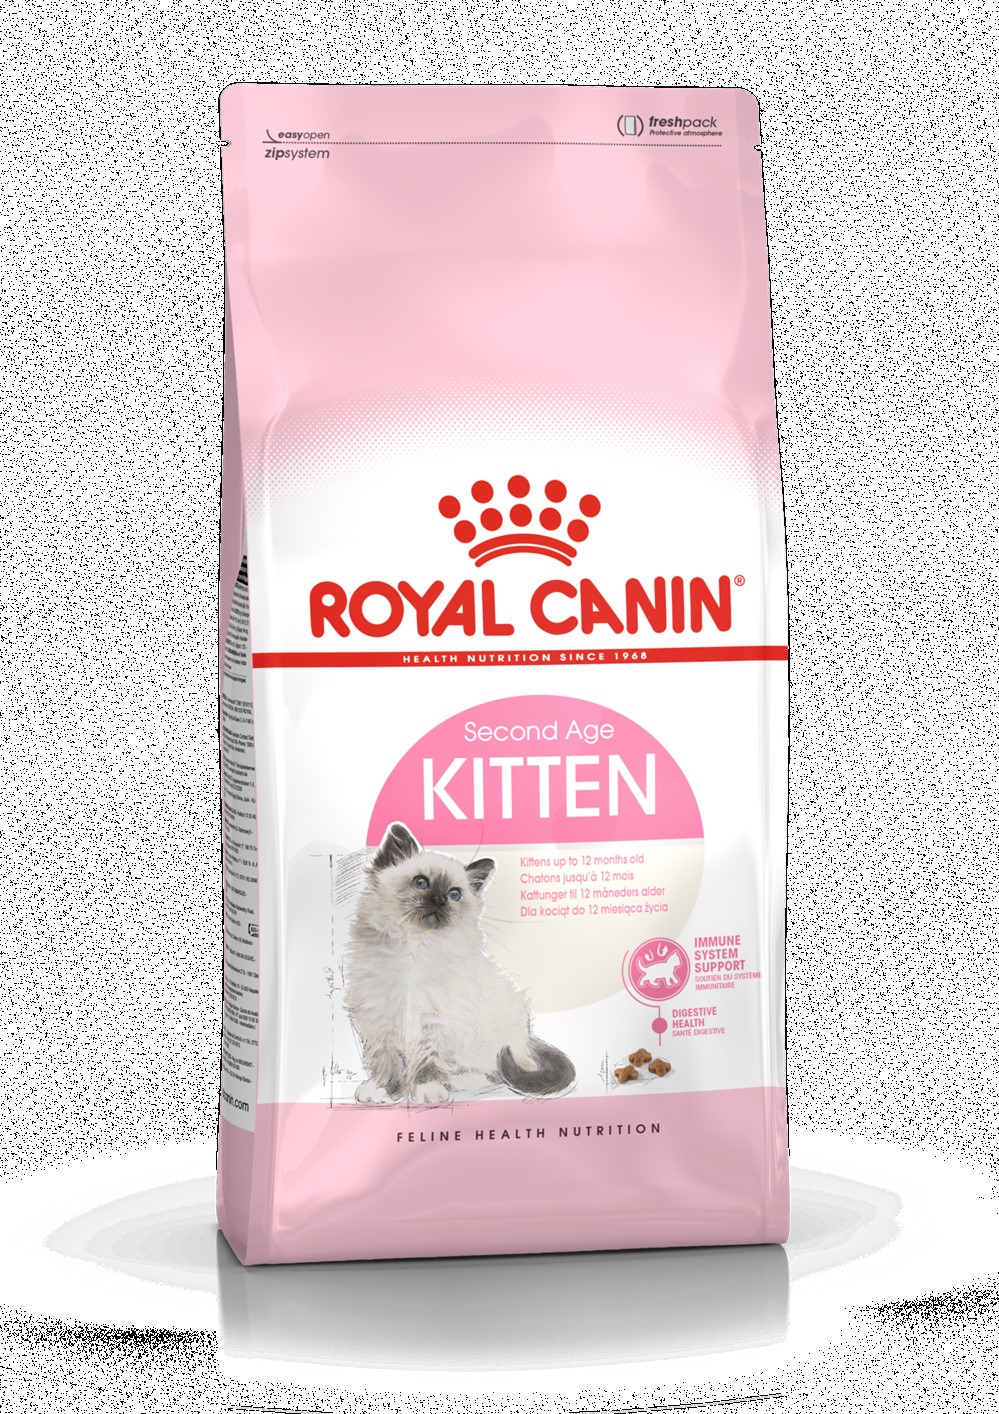 Croquette chaton kitten second âge 4kg - ROYAL CANIN 